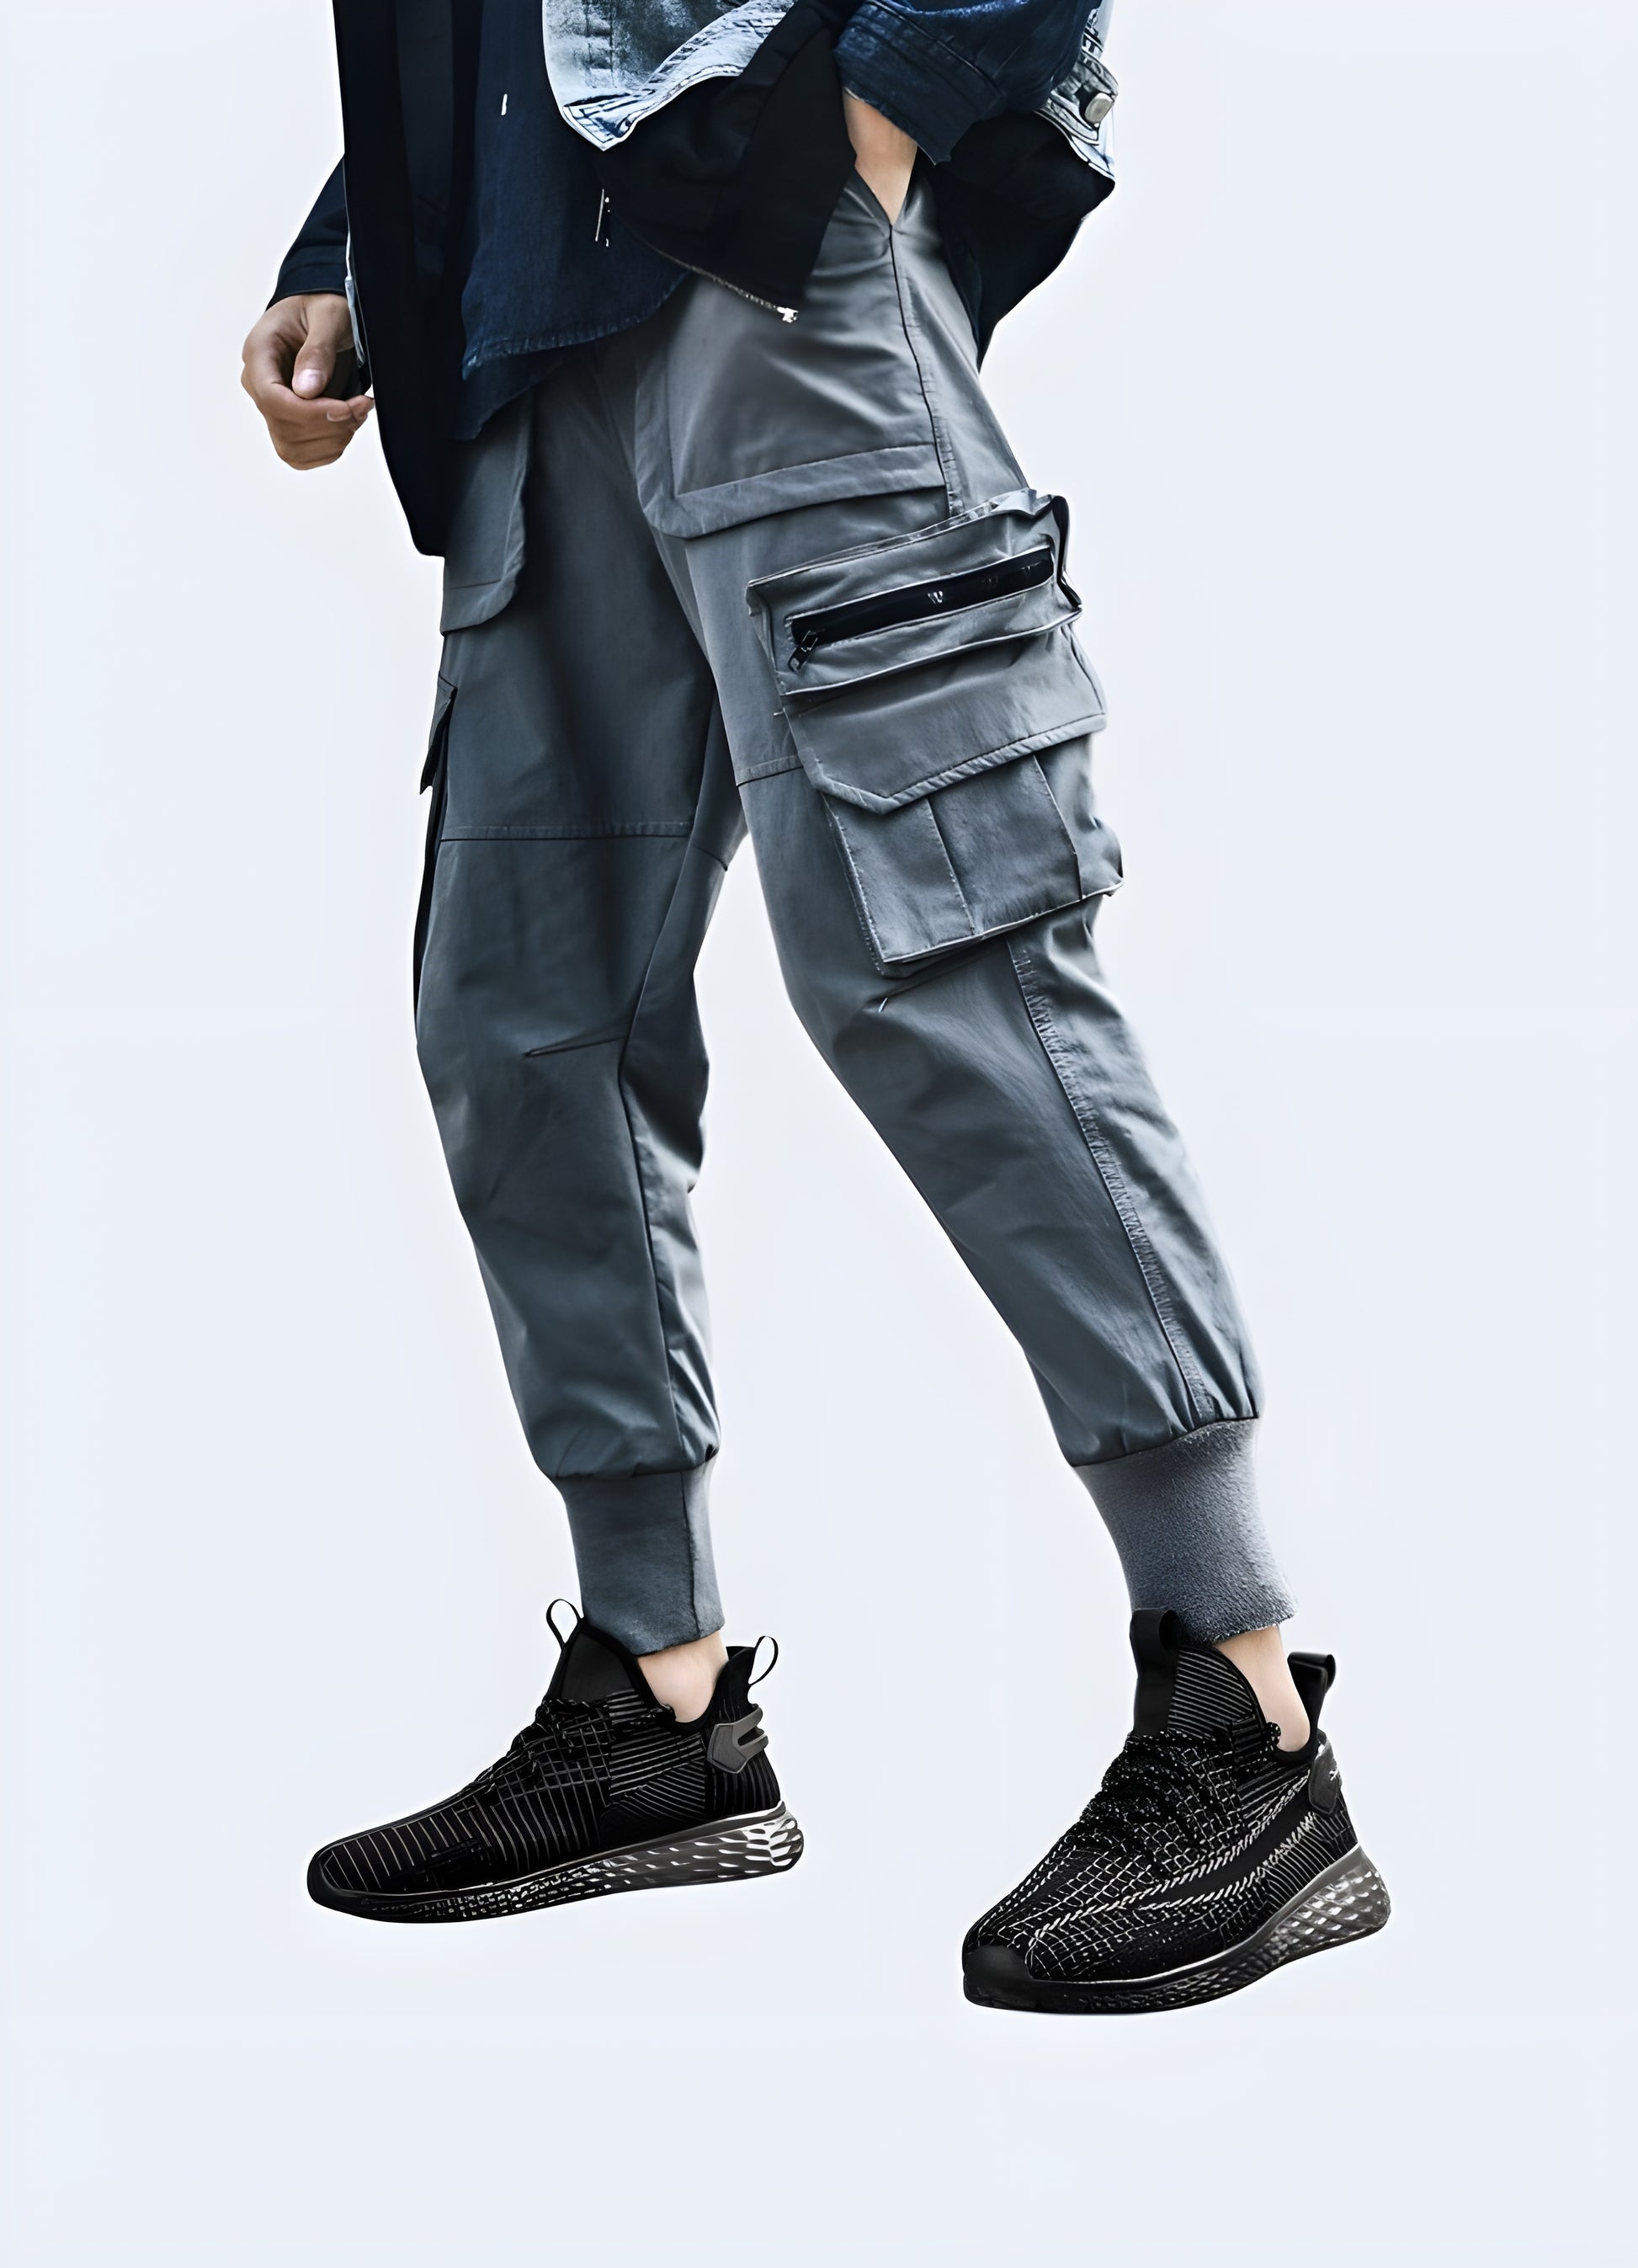 Crafted with a deep understanding of urban dynamics, these techwear shoes for men are designed for breathability.